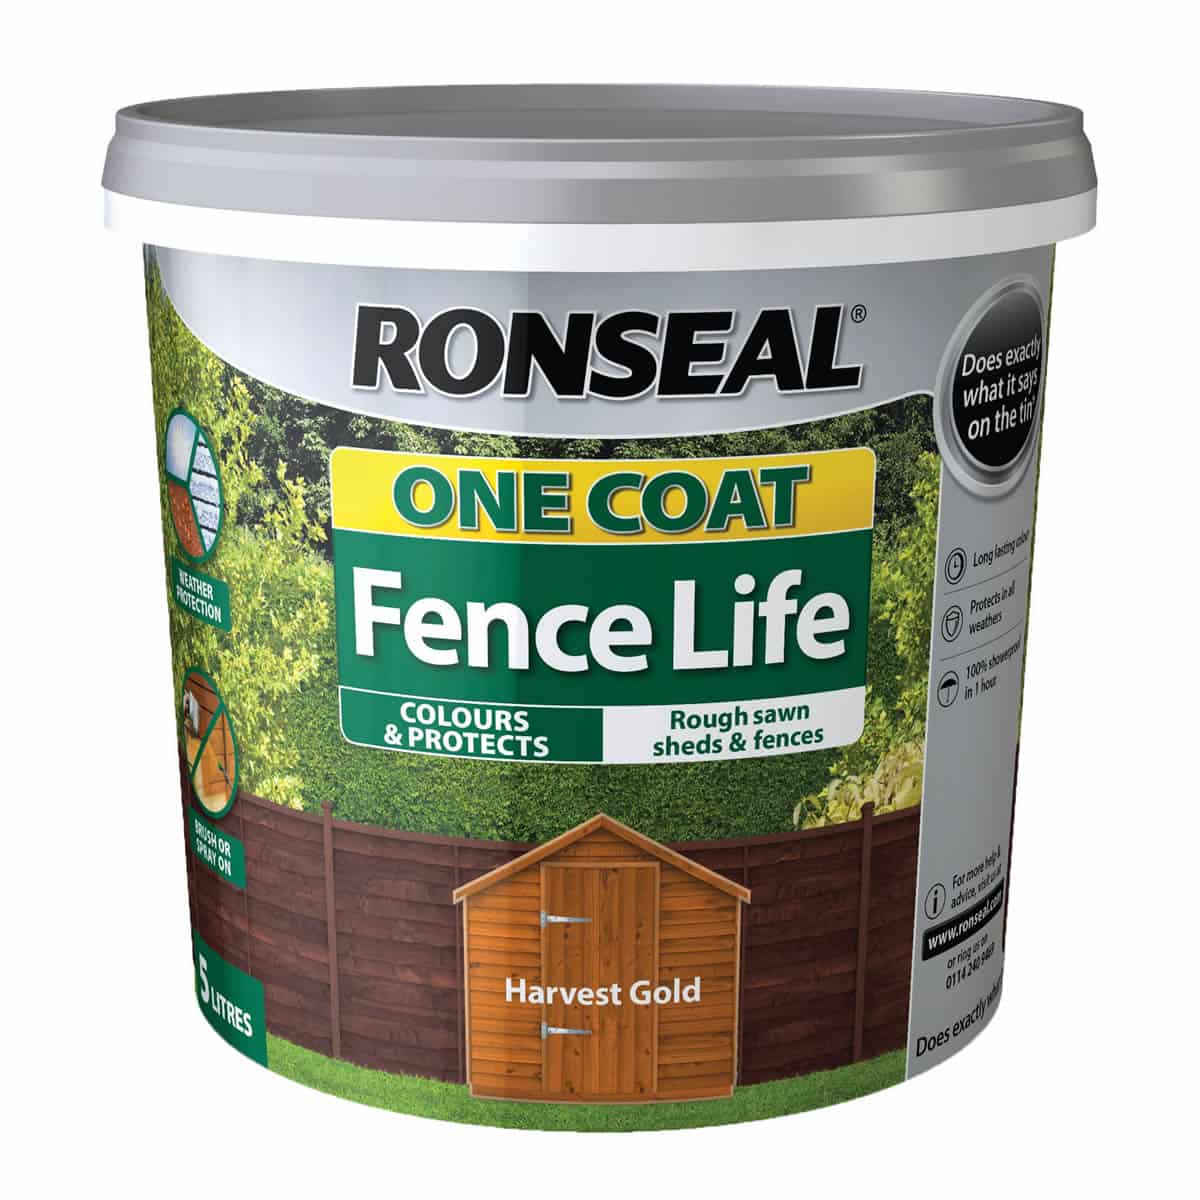 Ronseal Fence Life One Coat 5 Litre